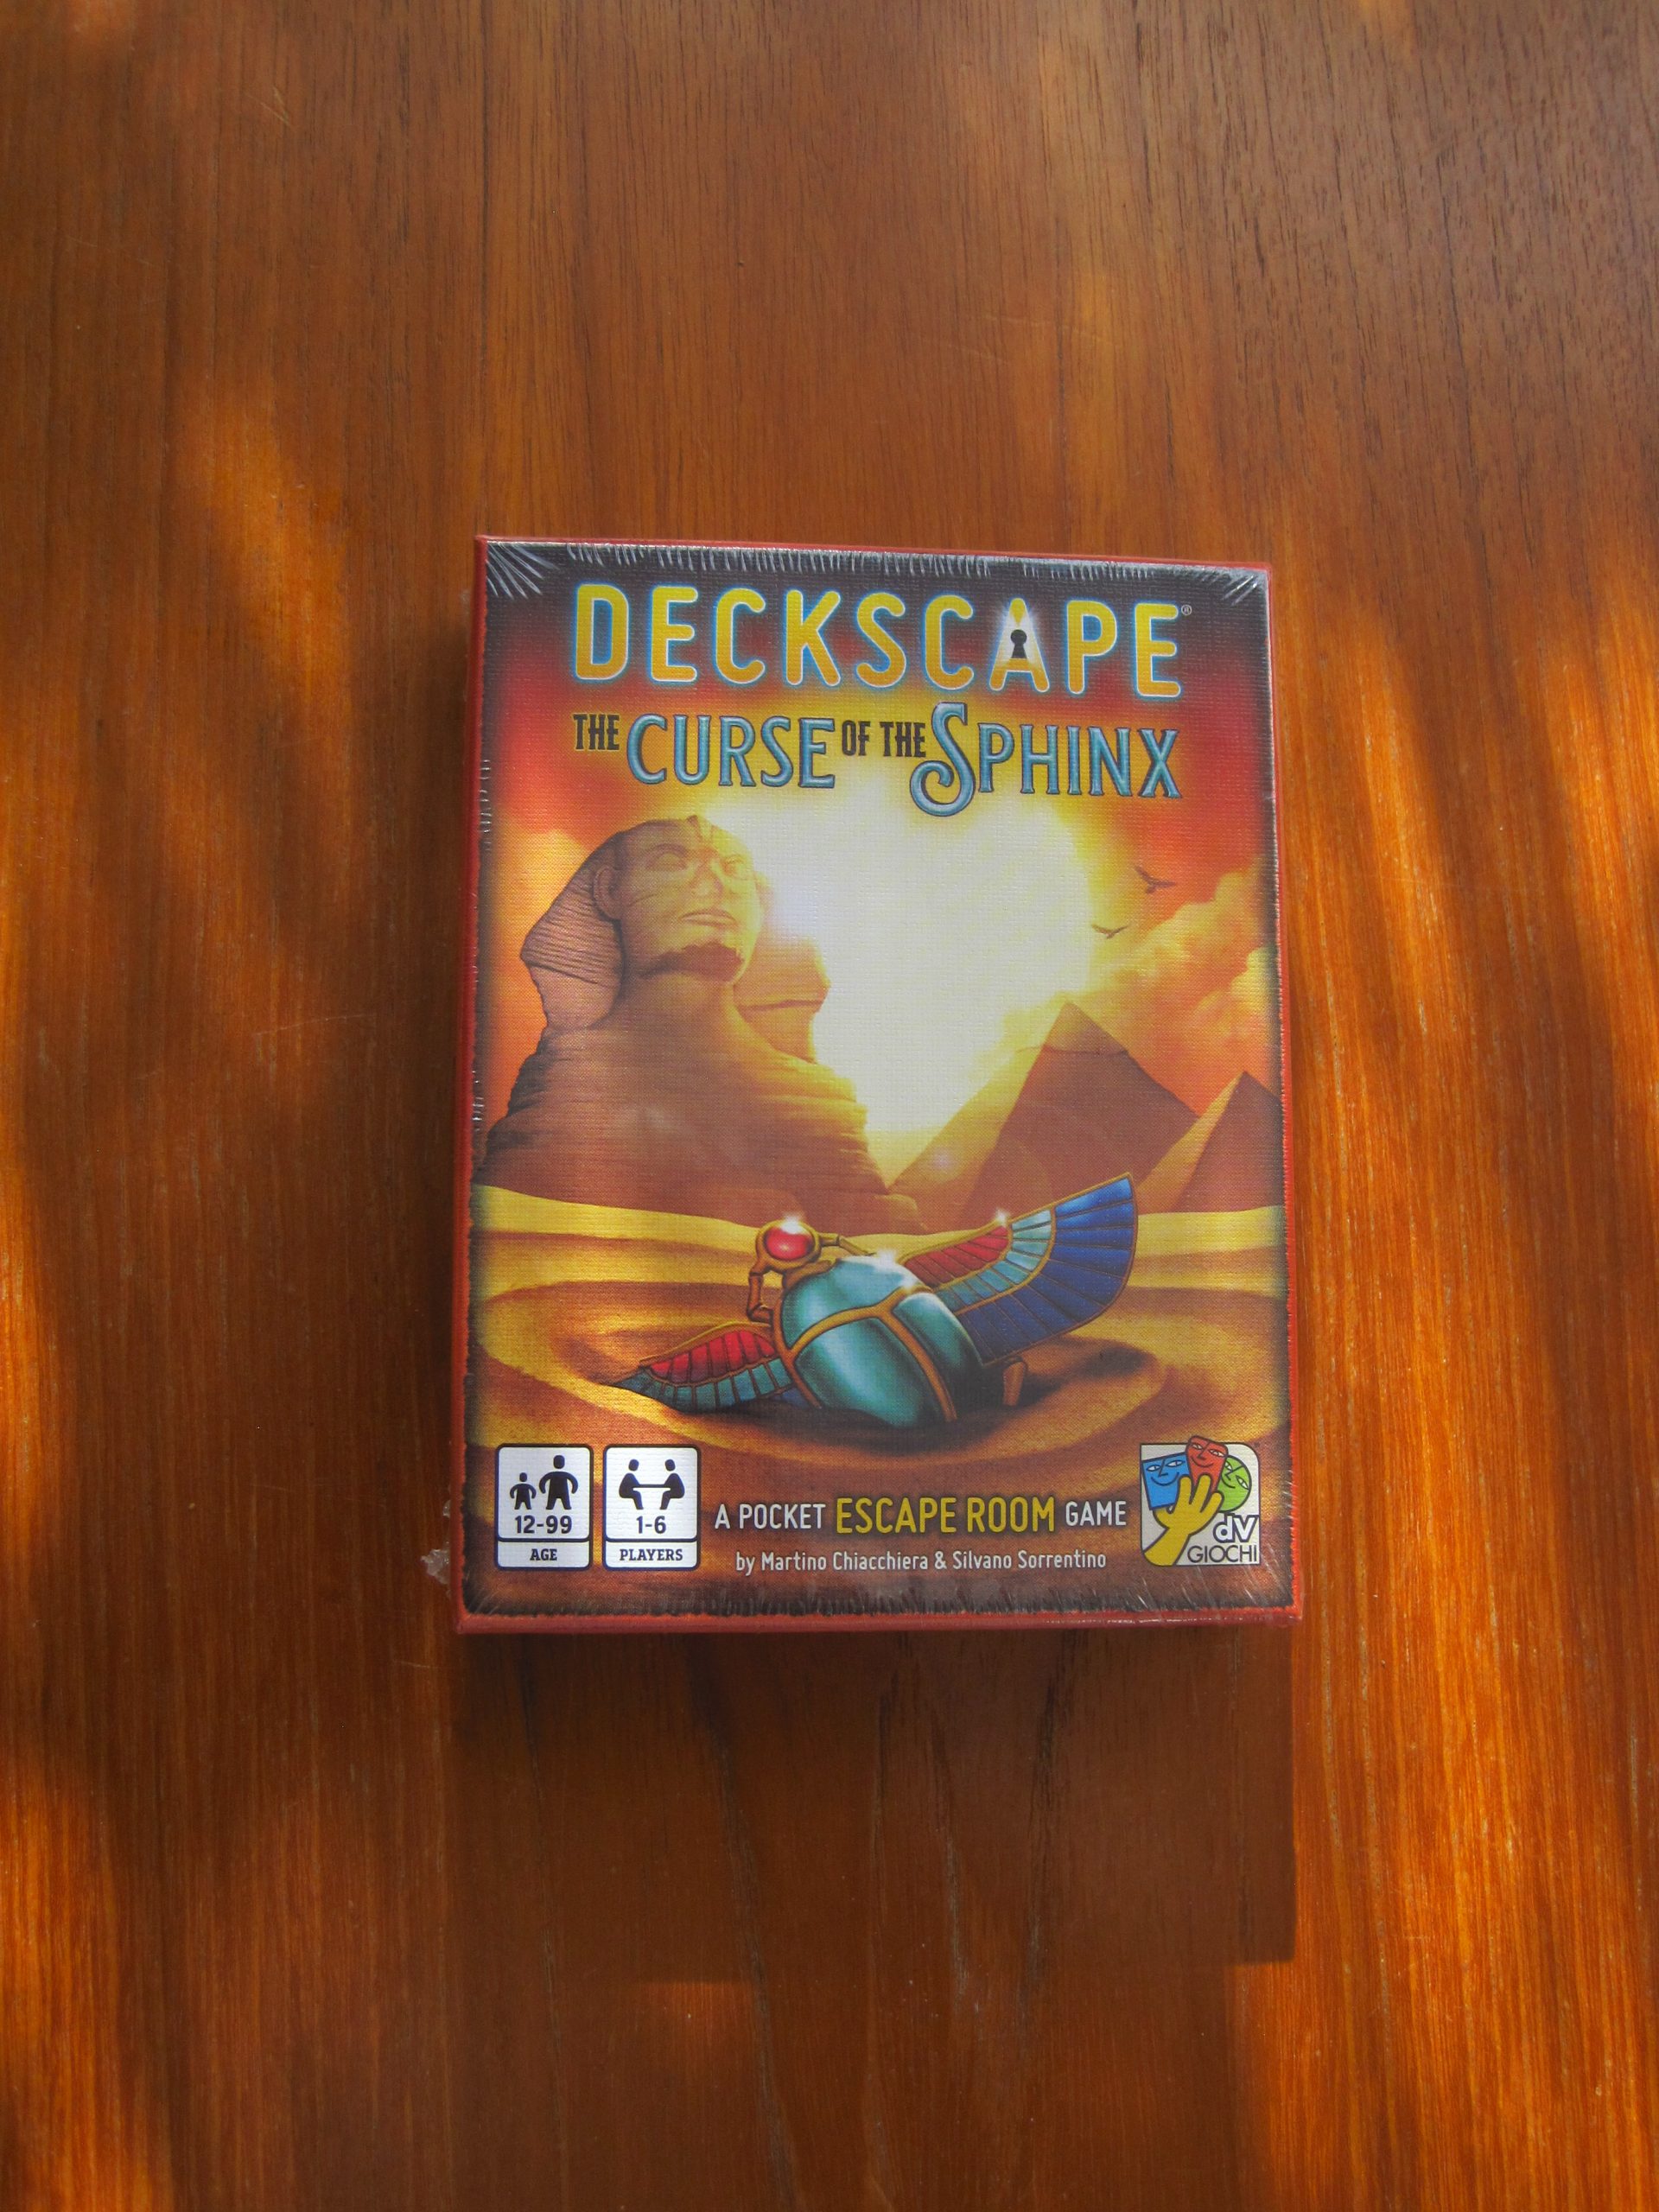 Deckscape - The Curse of the Sphinx - photo by Juliamaud